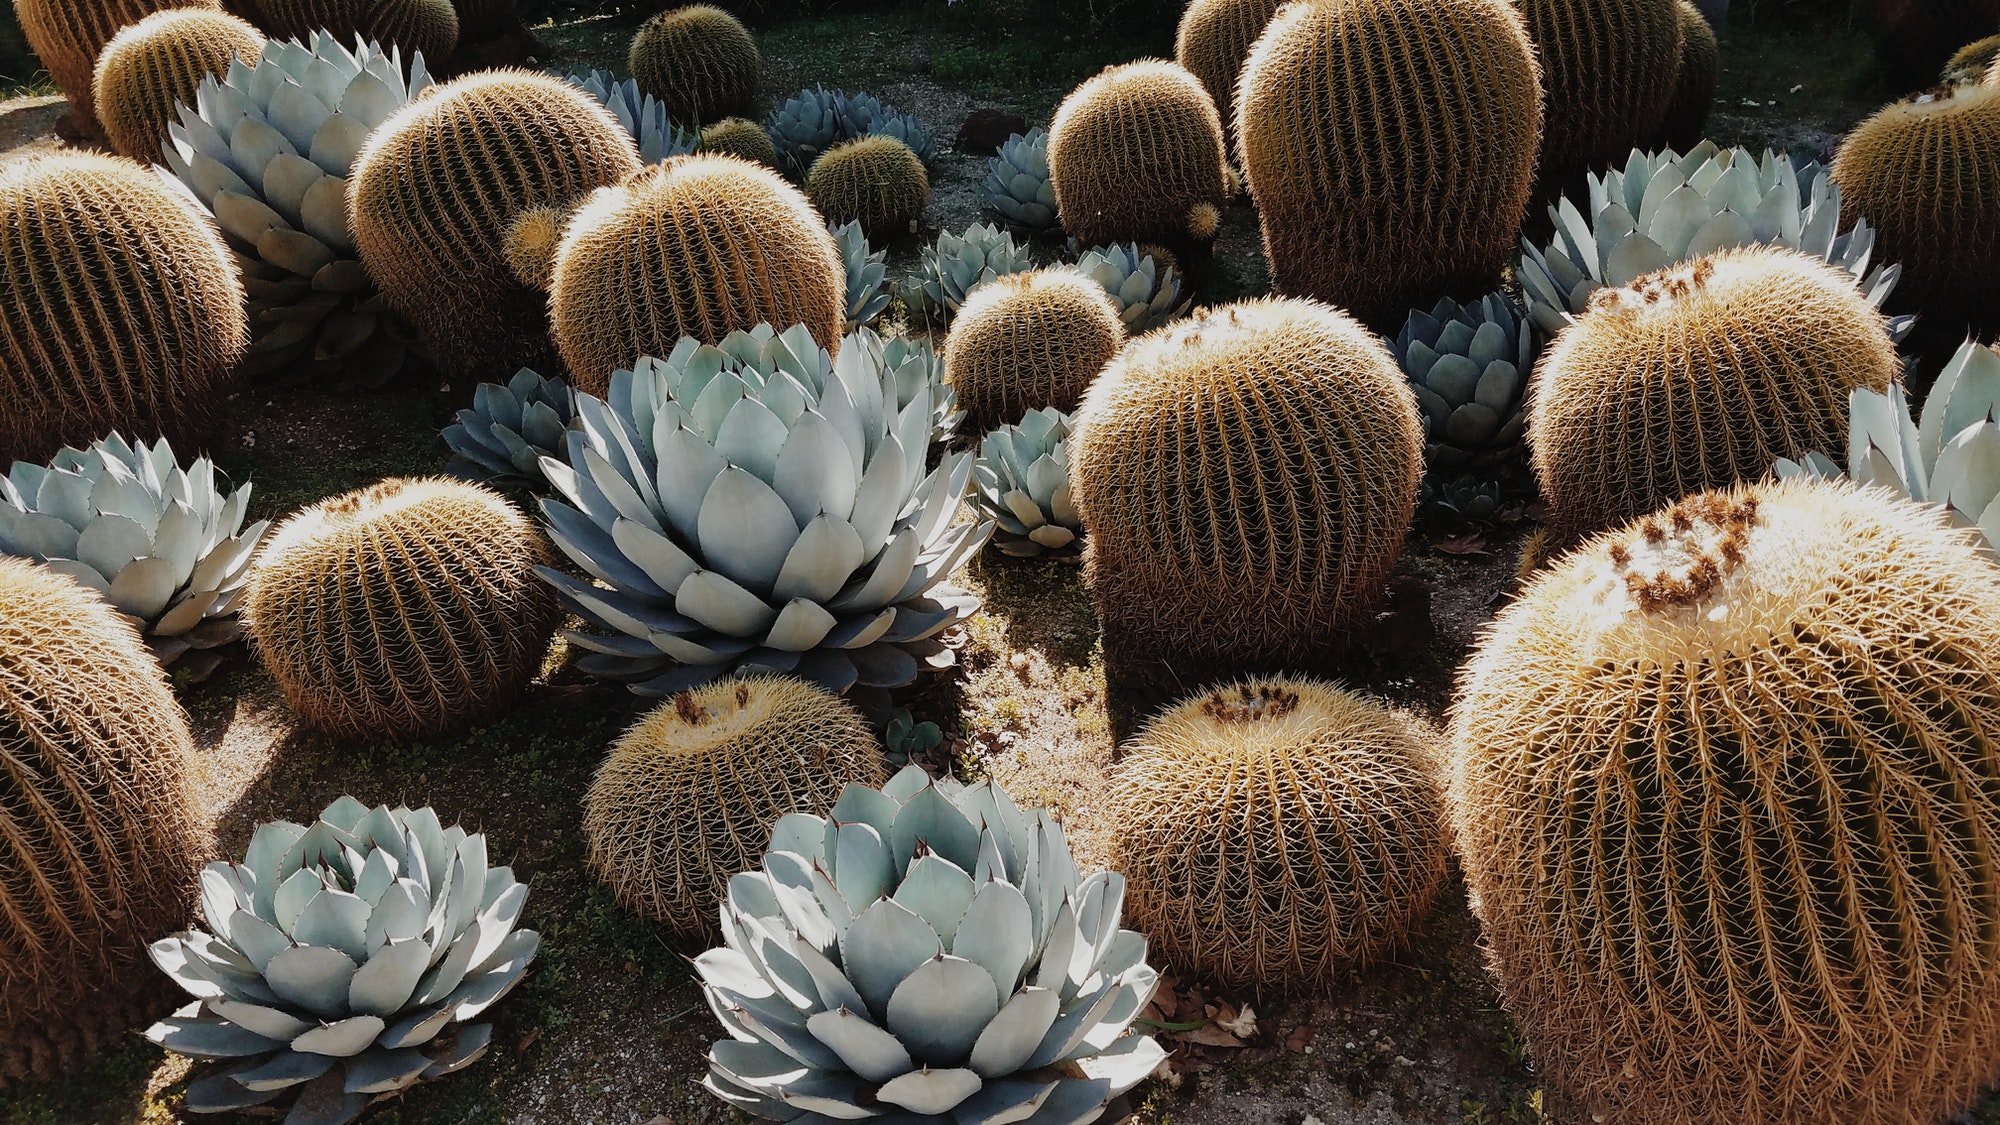 Cactus and agave